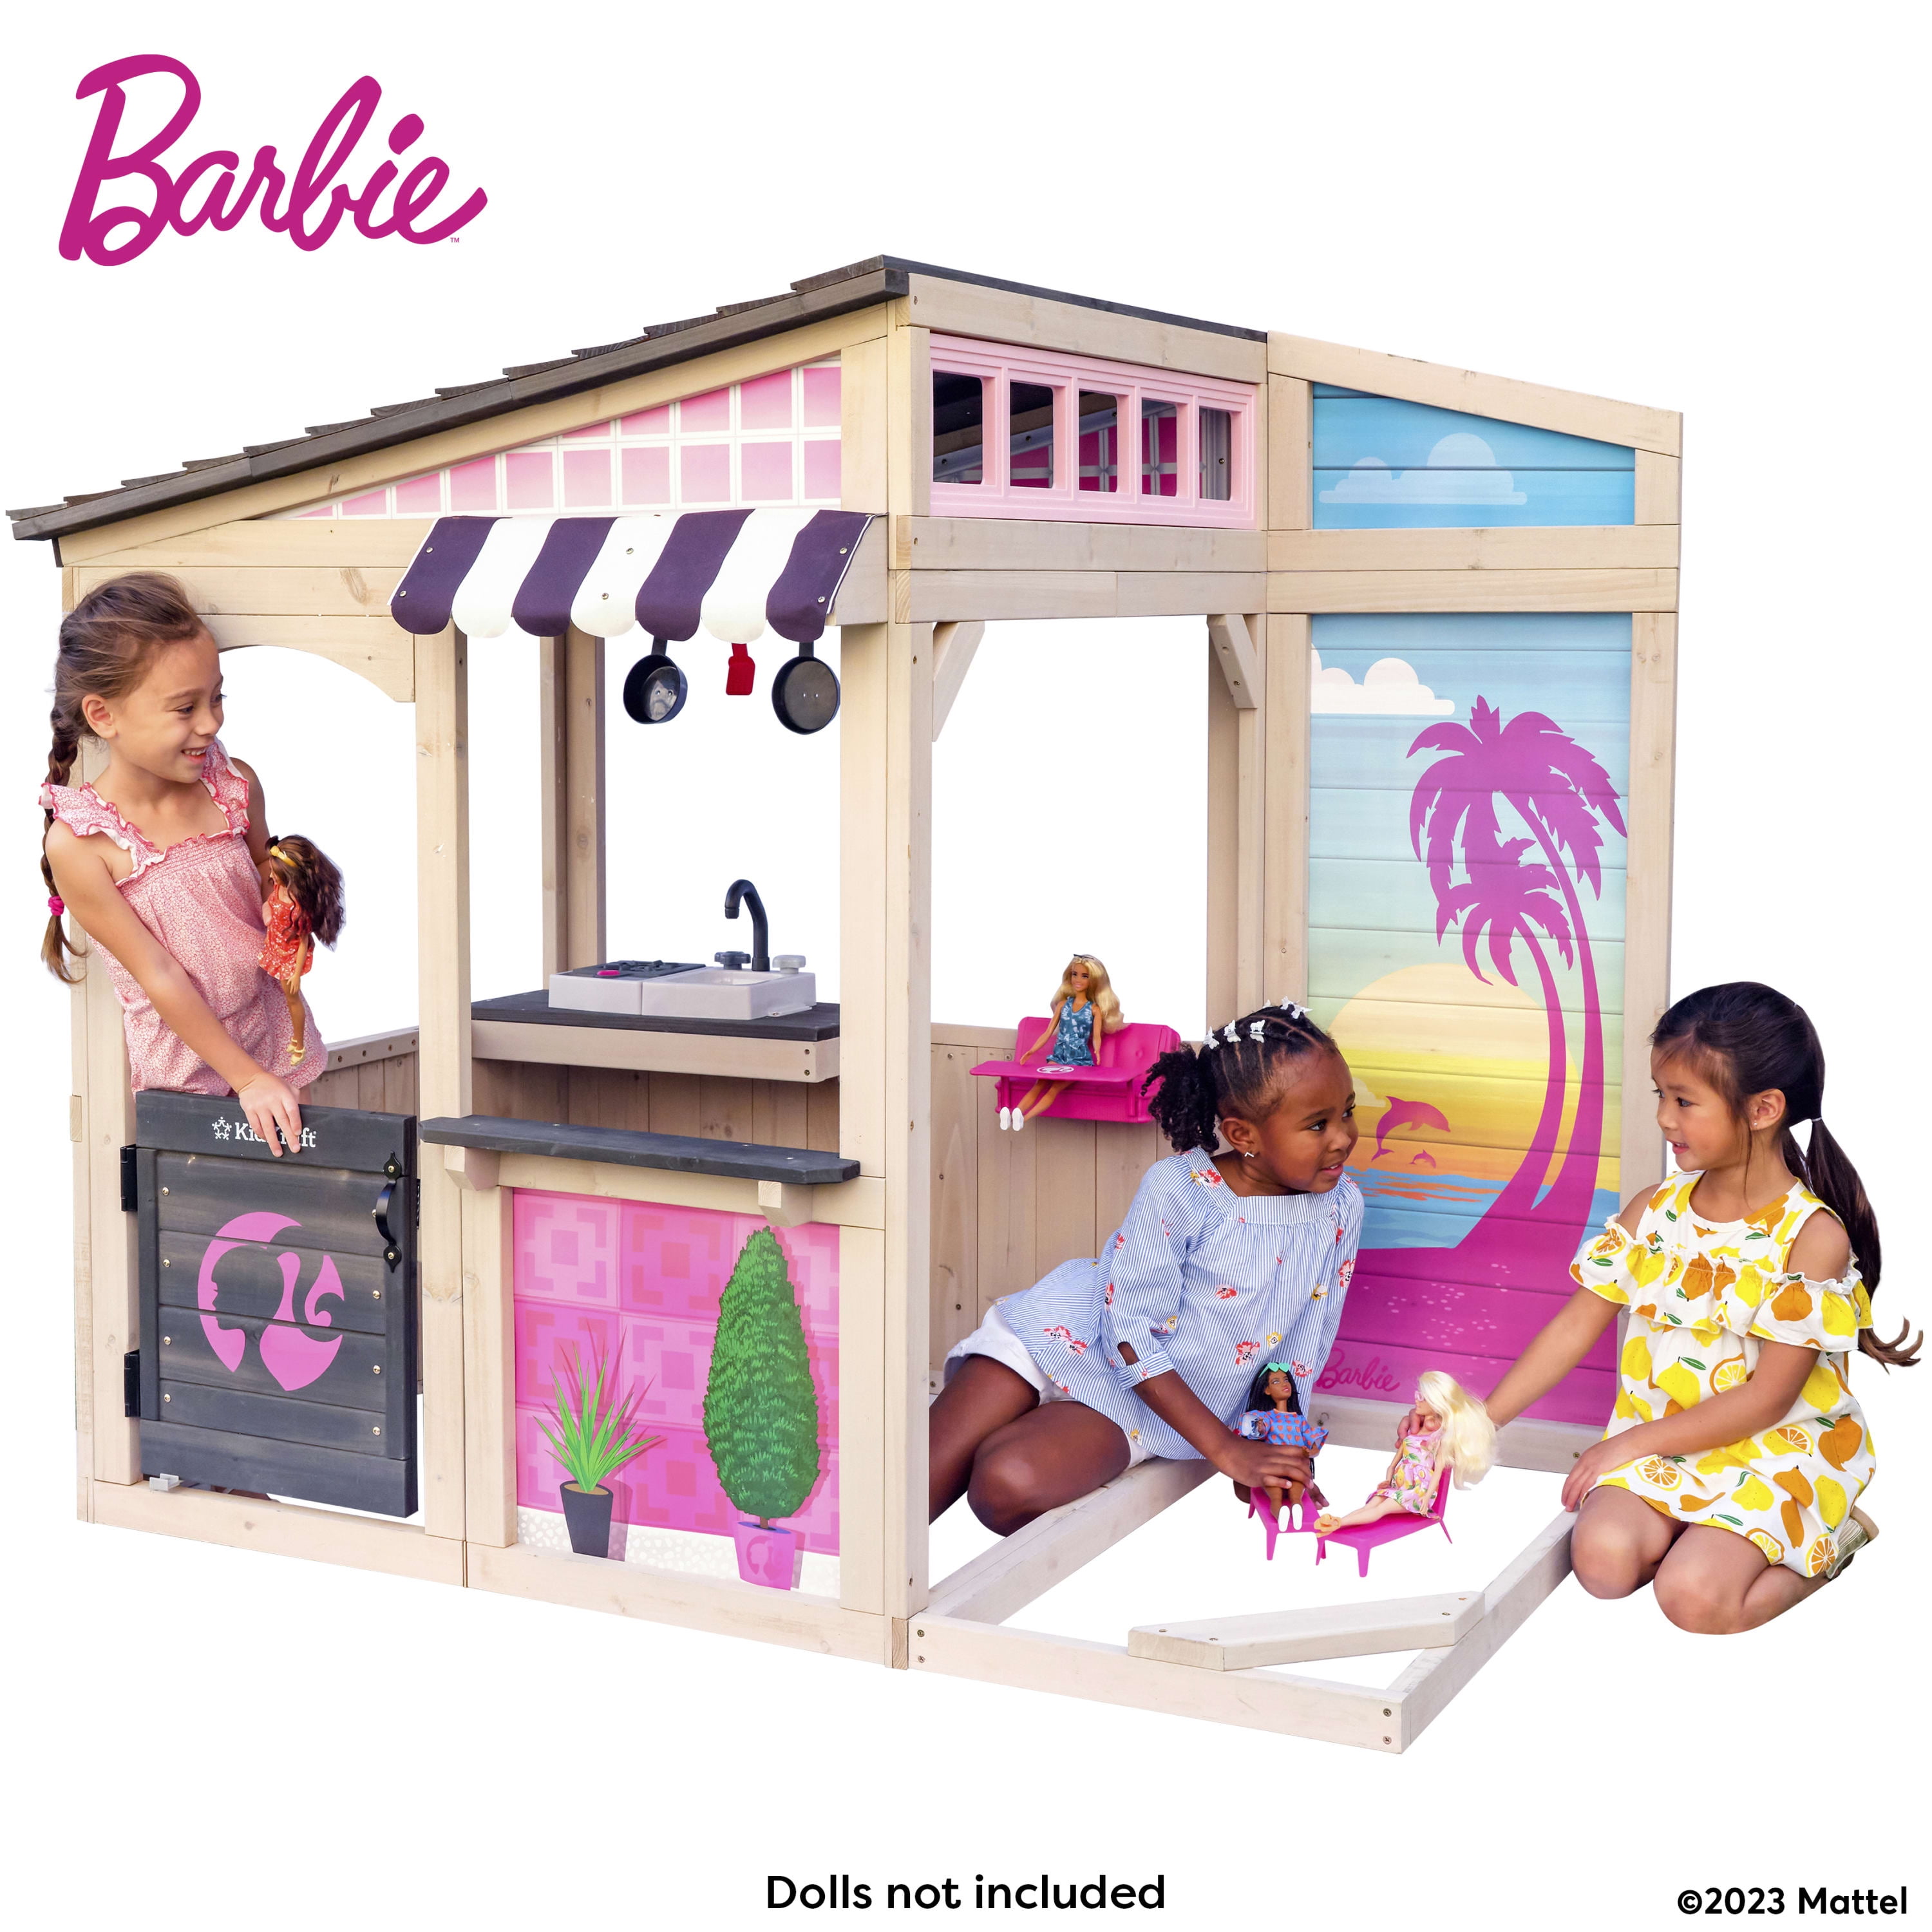 Doll house makeover & DIY Barbie furniture – House Mix